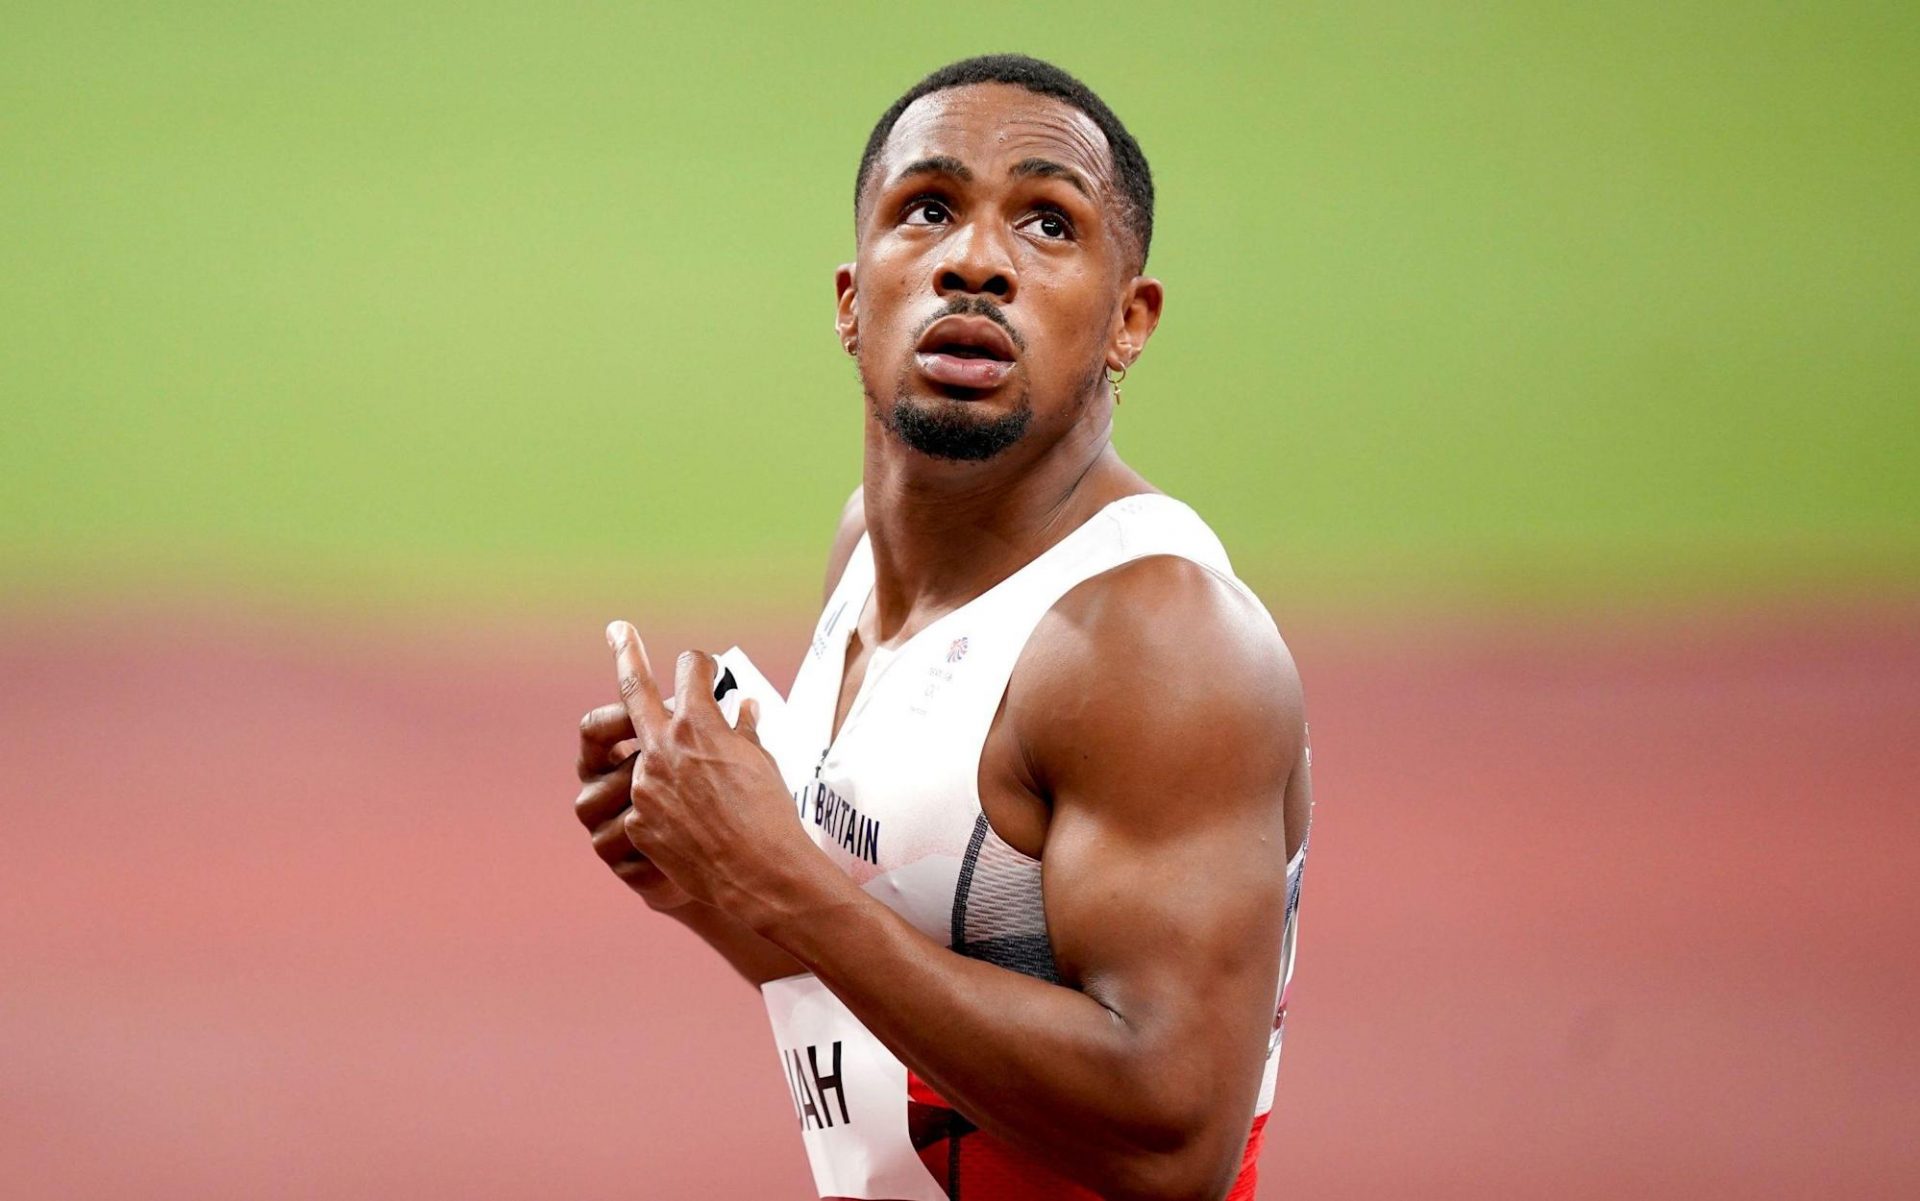 ‘The total ingredient makes me smile’: Olympic 100m champion Lamont Marcell Jacobs responds to CJ Ujah’s sure take a look at